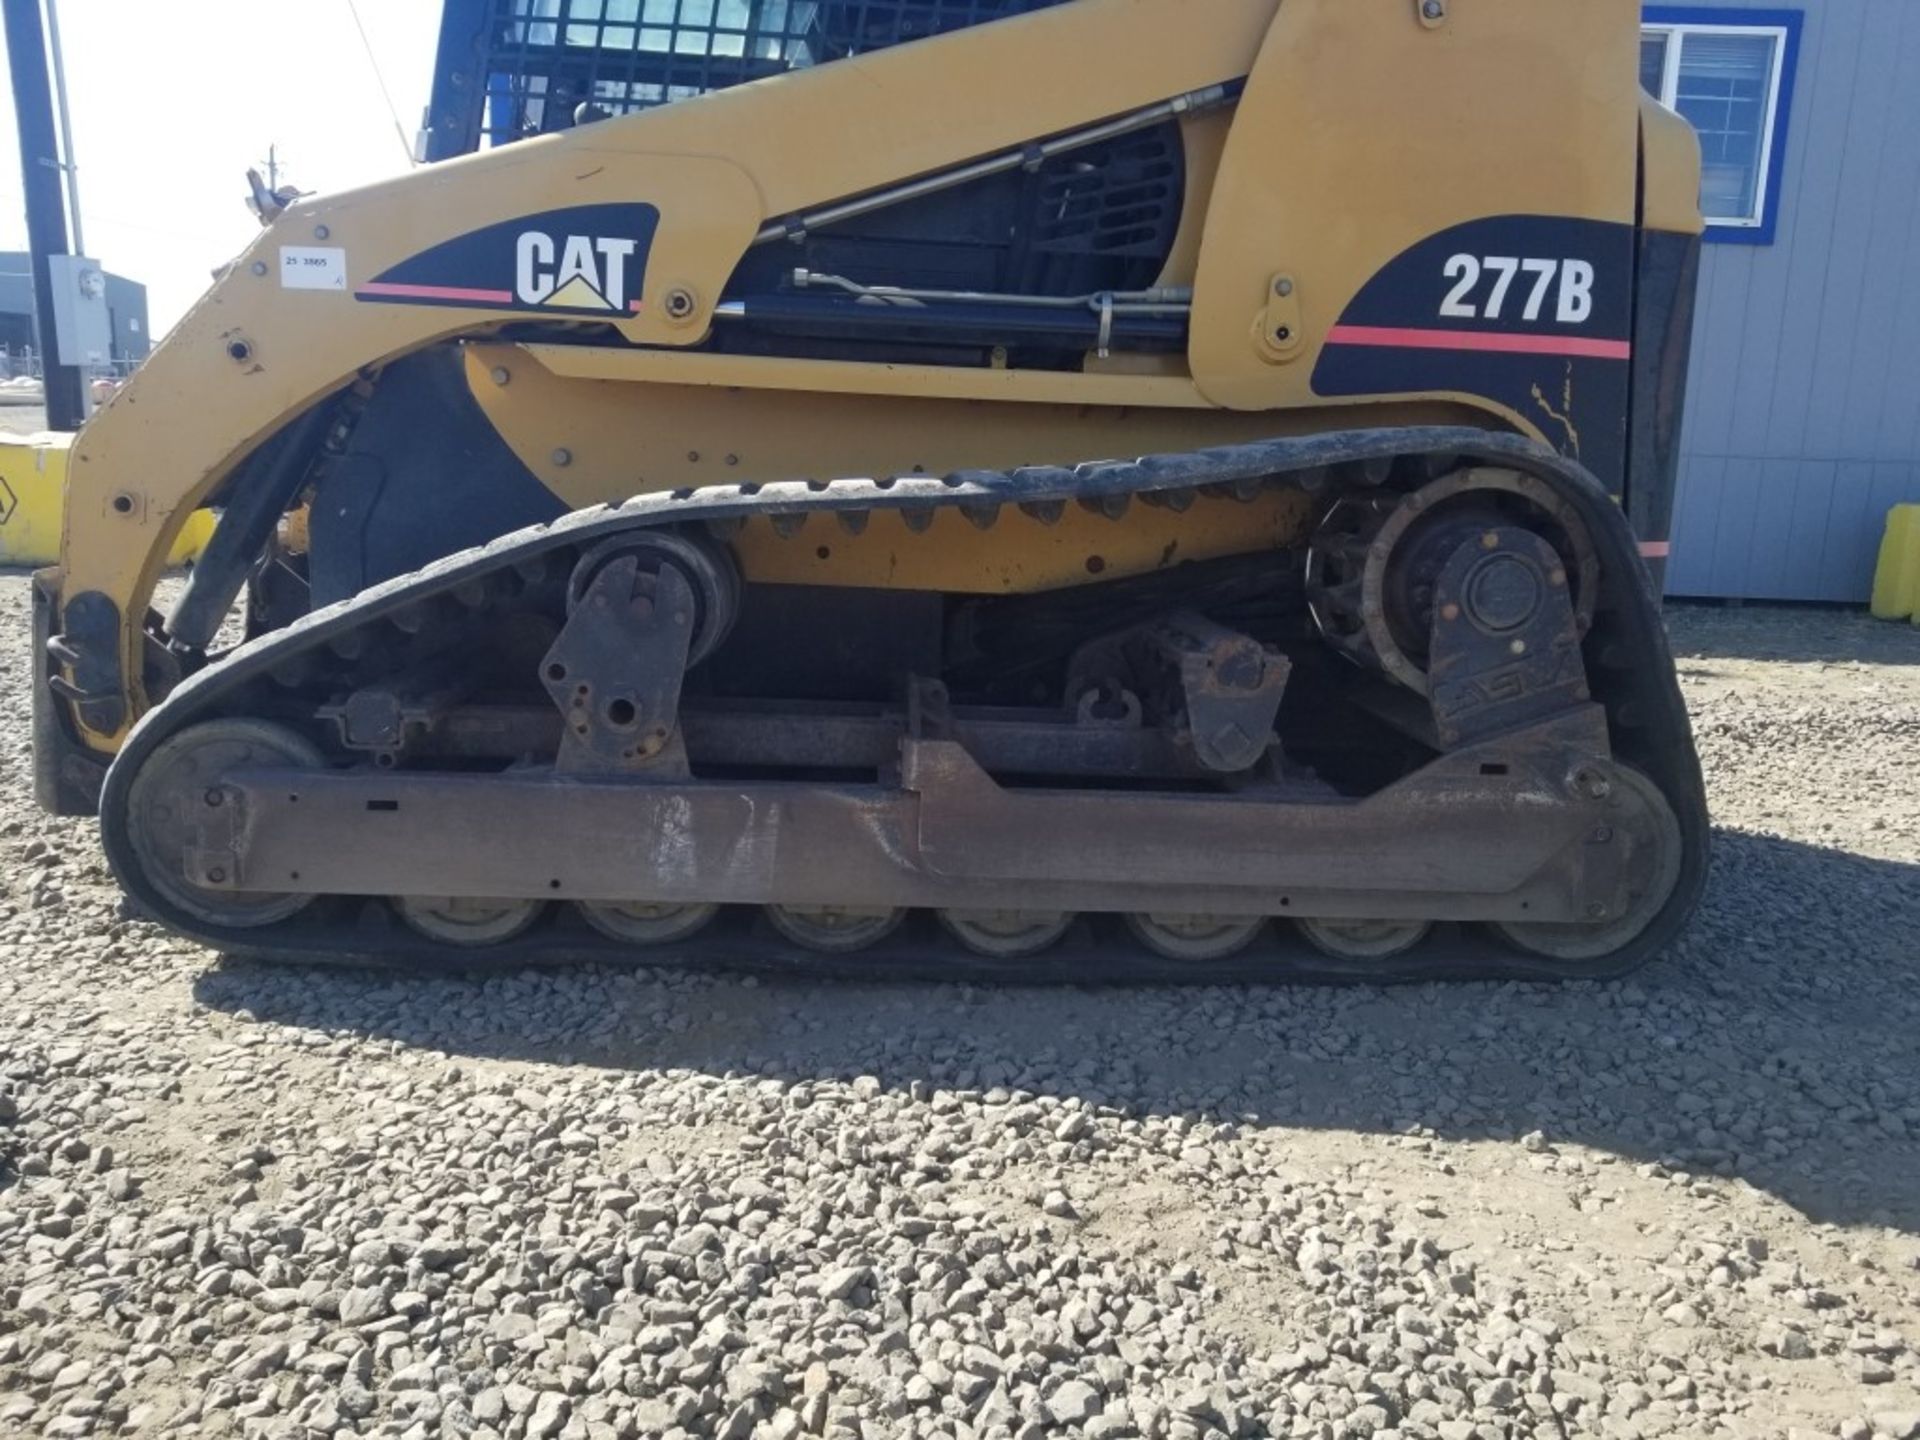 Caterpillar 277B Compact Track Loader - Image 8 of 19